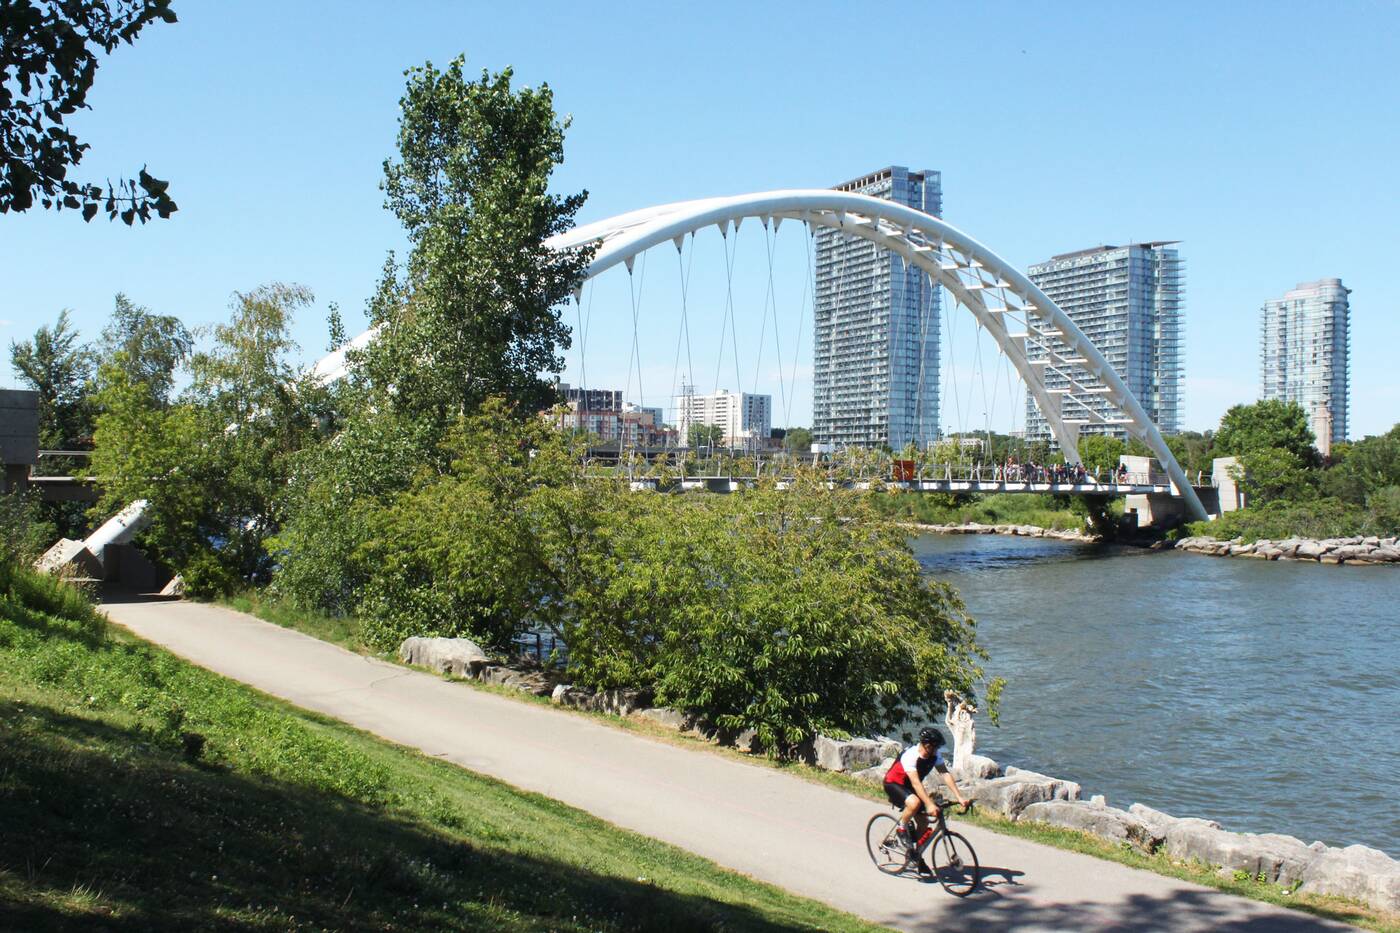 The Humber Bay Arch Bridge is one of Toronto's most enduring landmarks